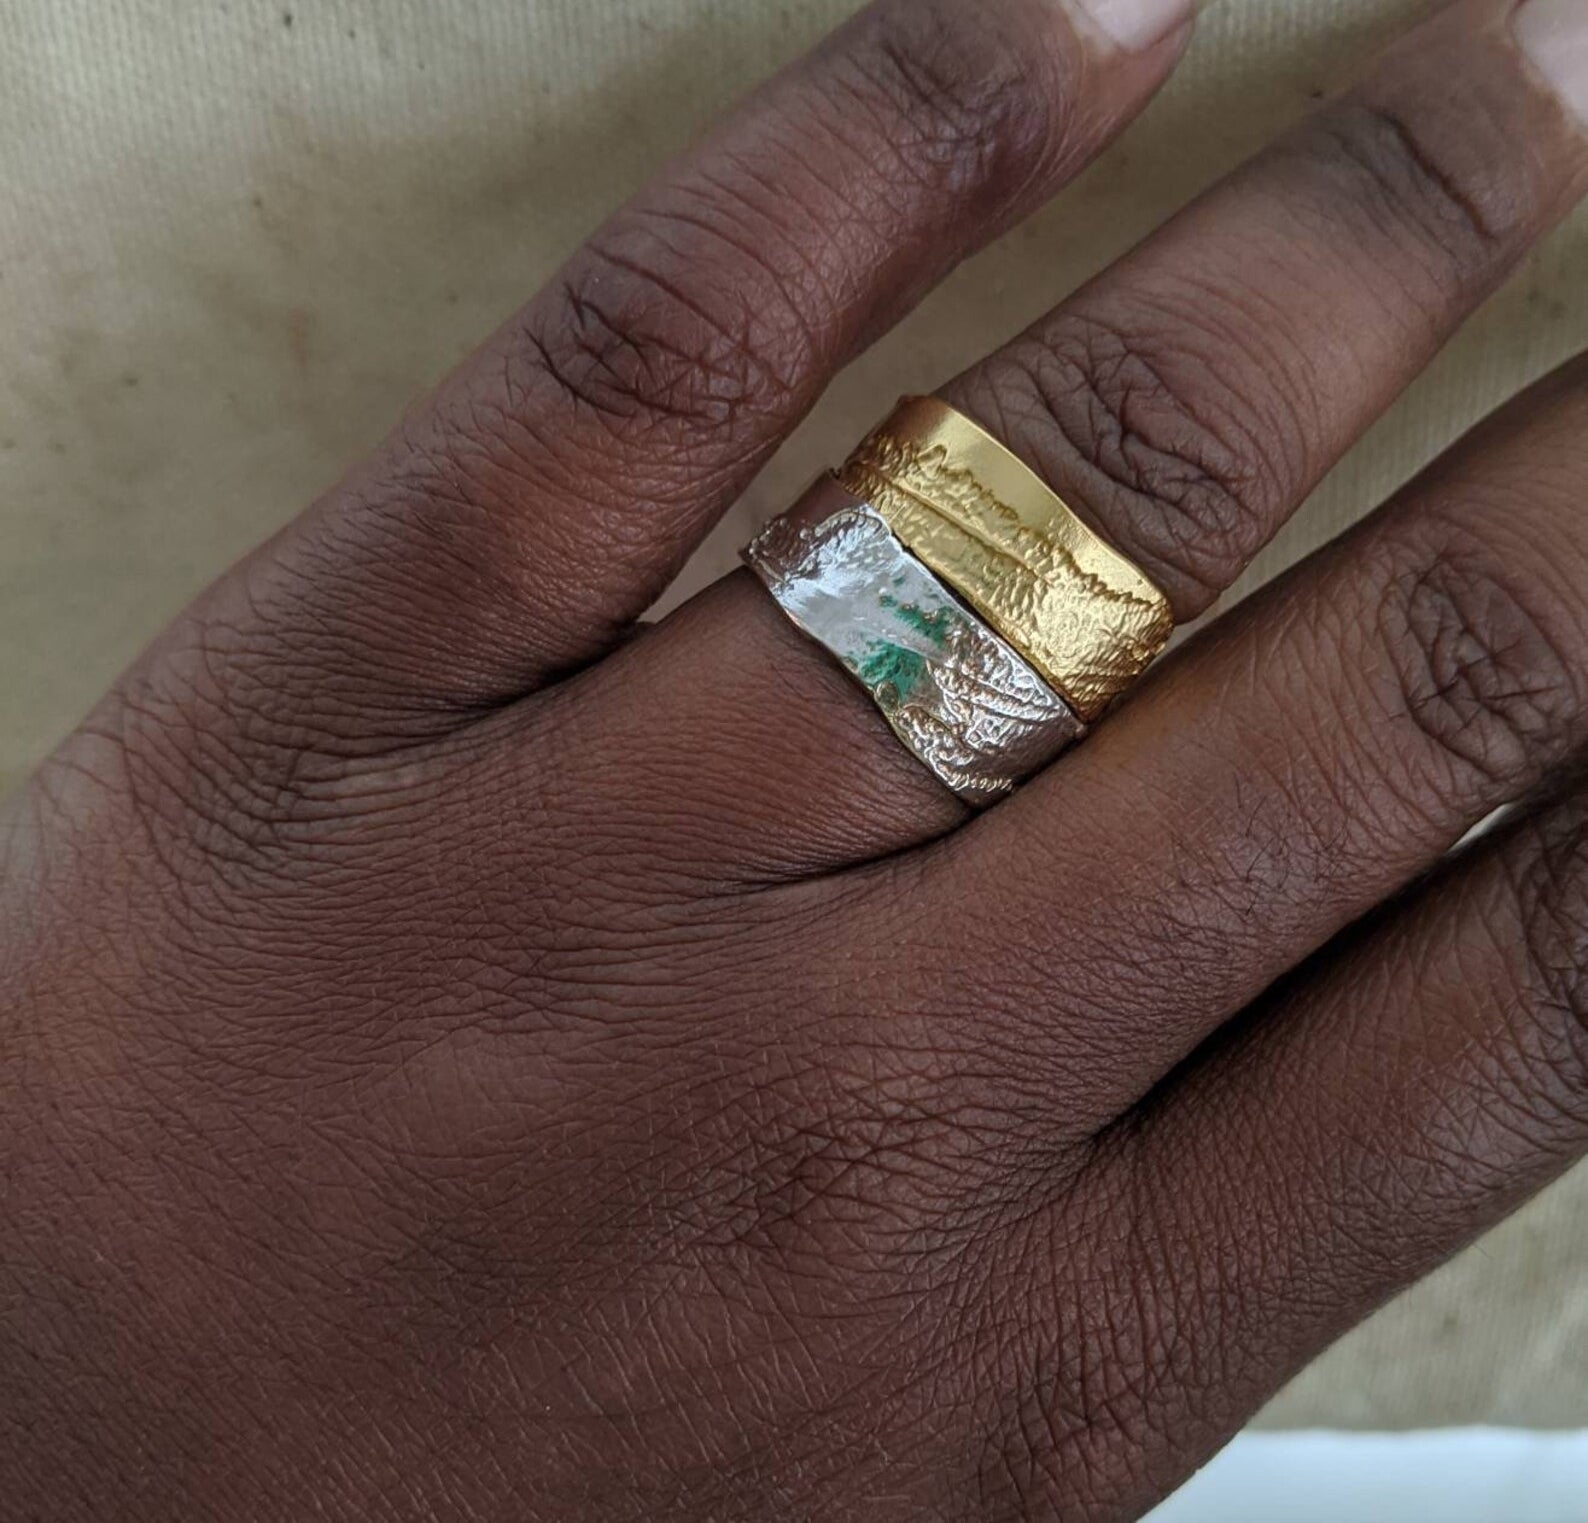 the ring in gold and silver stacked on one finger. both are flat and etched.